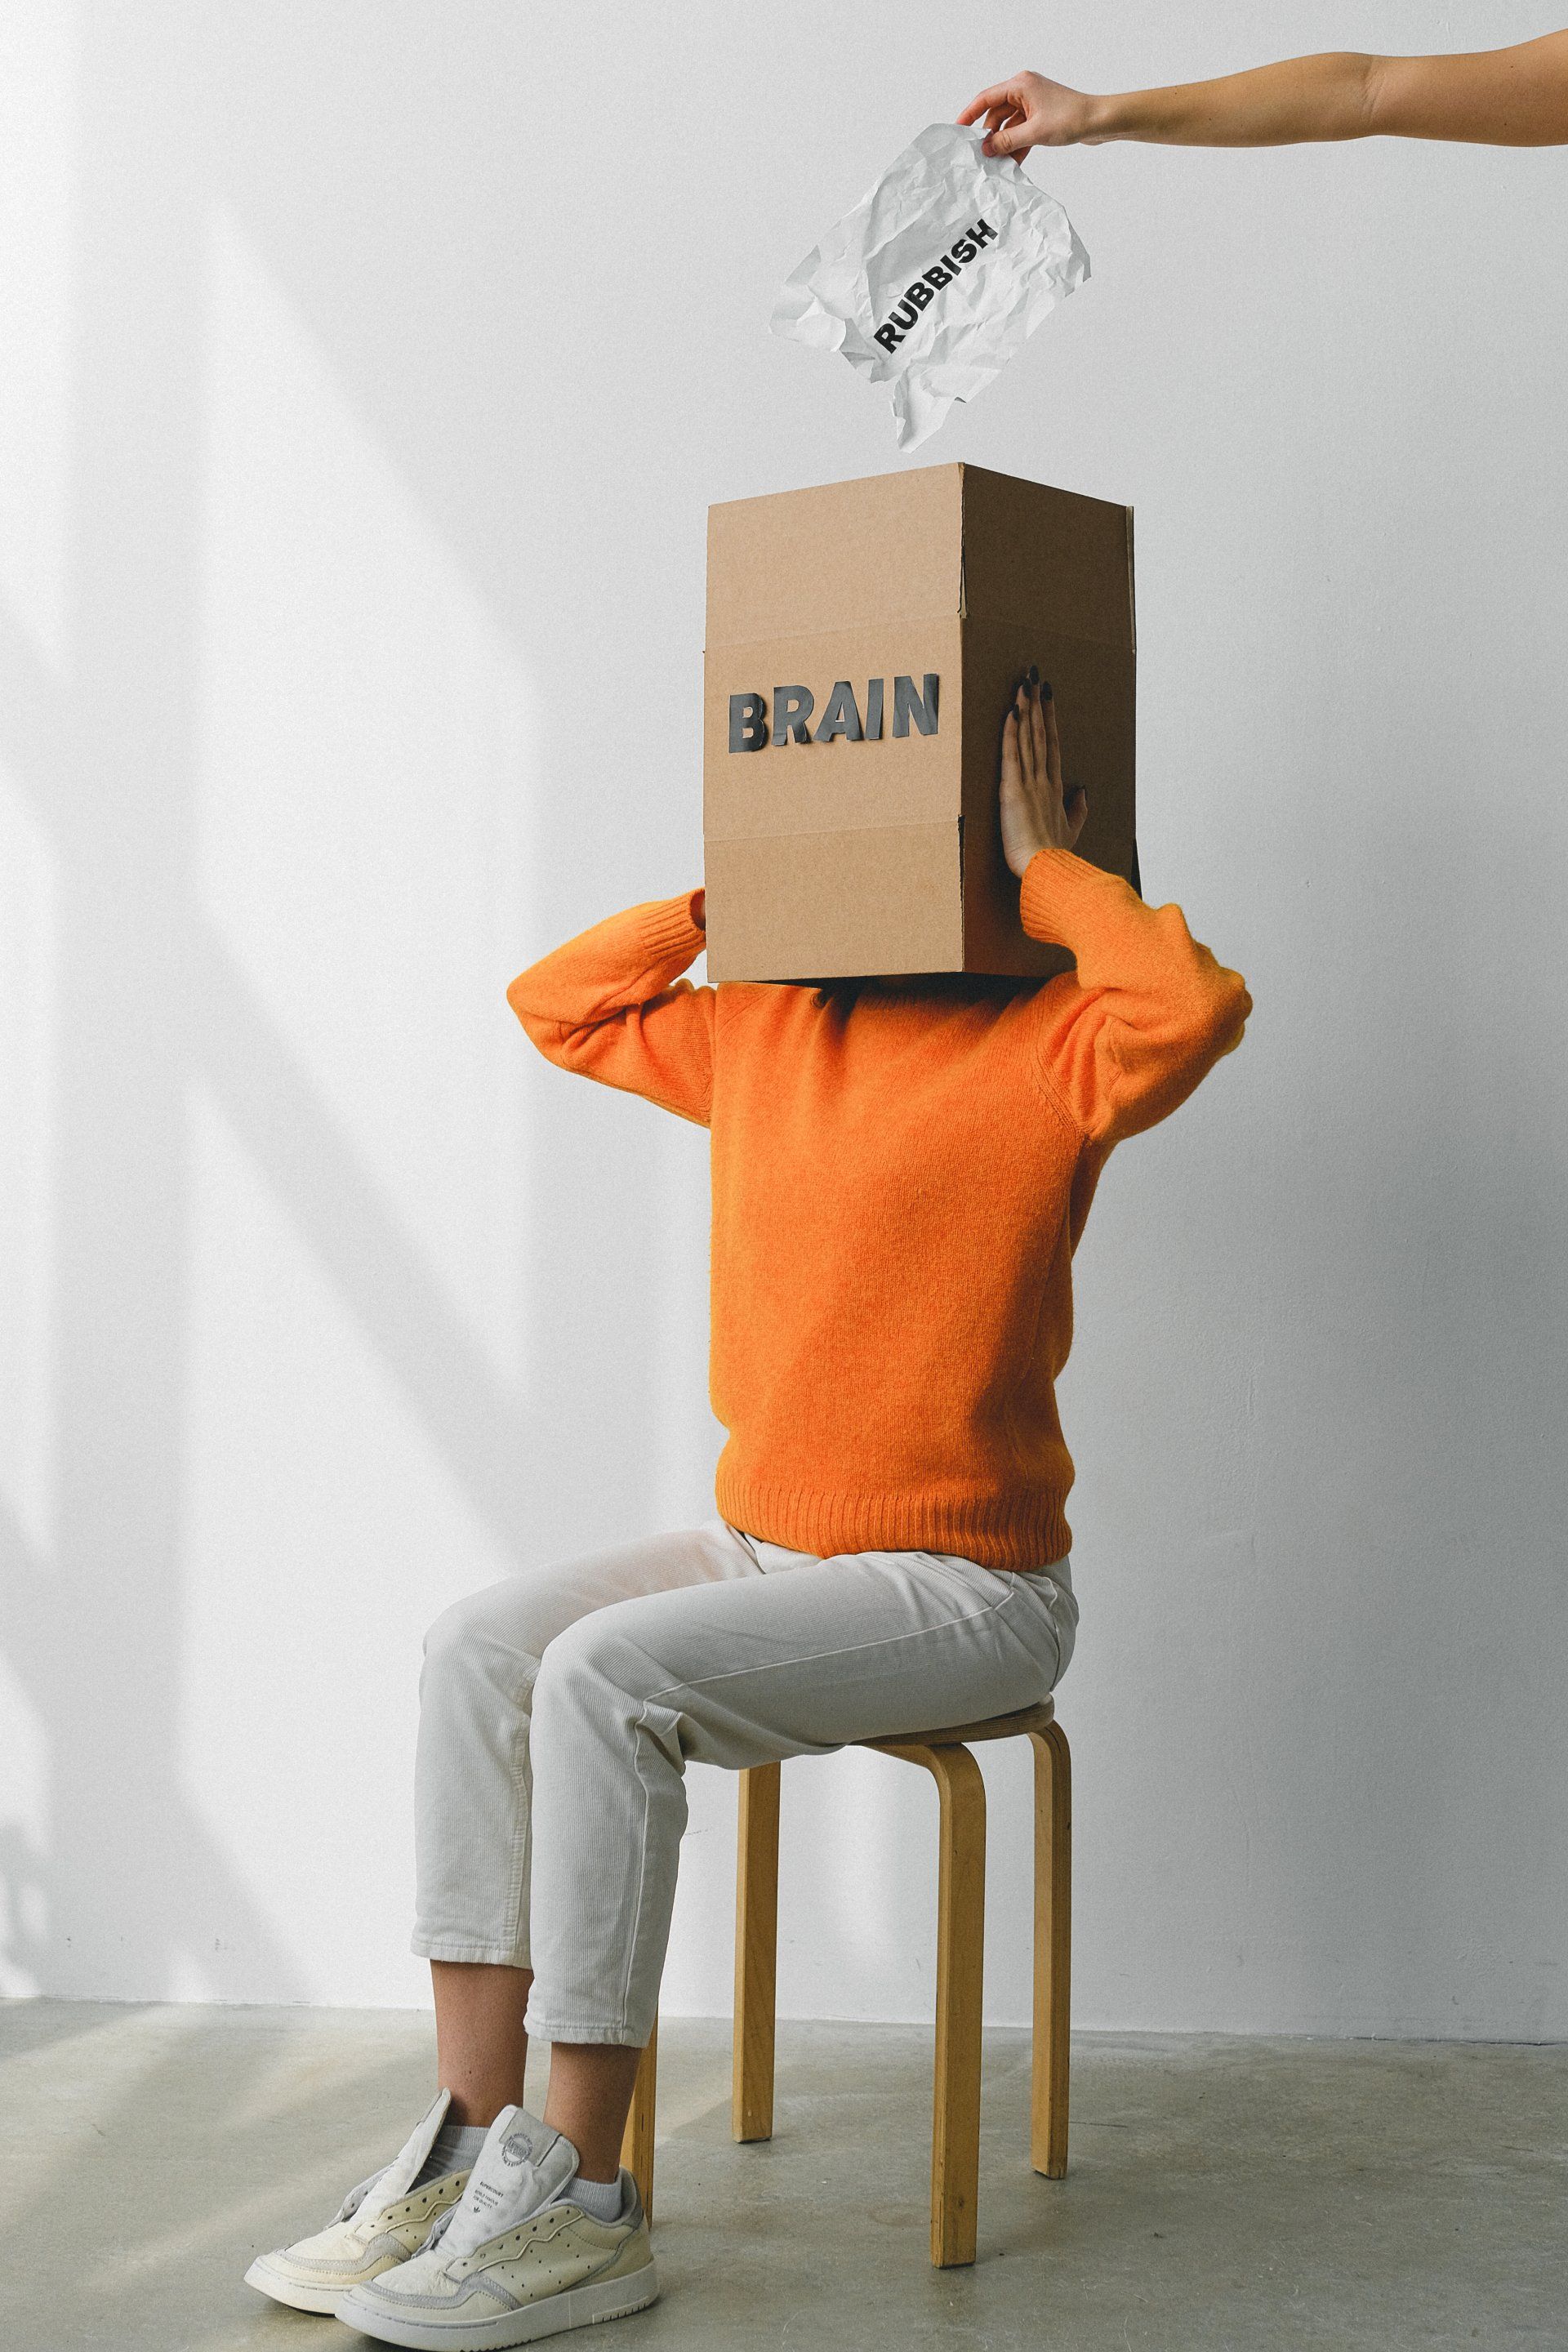 Man sitting on chair with a box over his head and the box has 